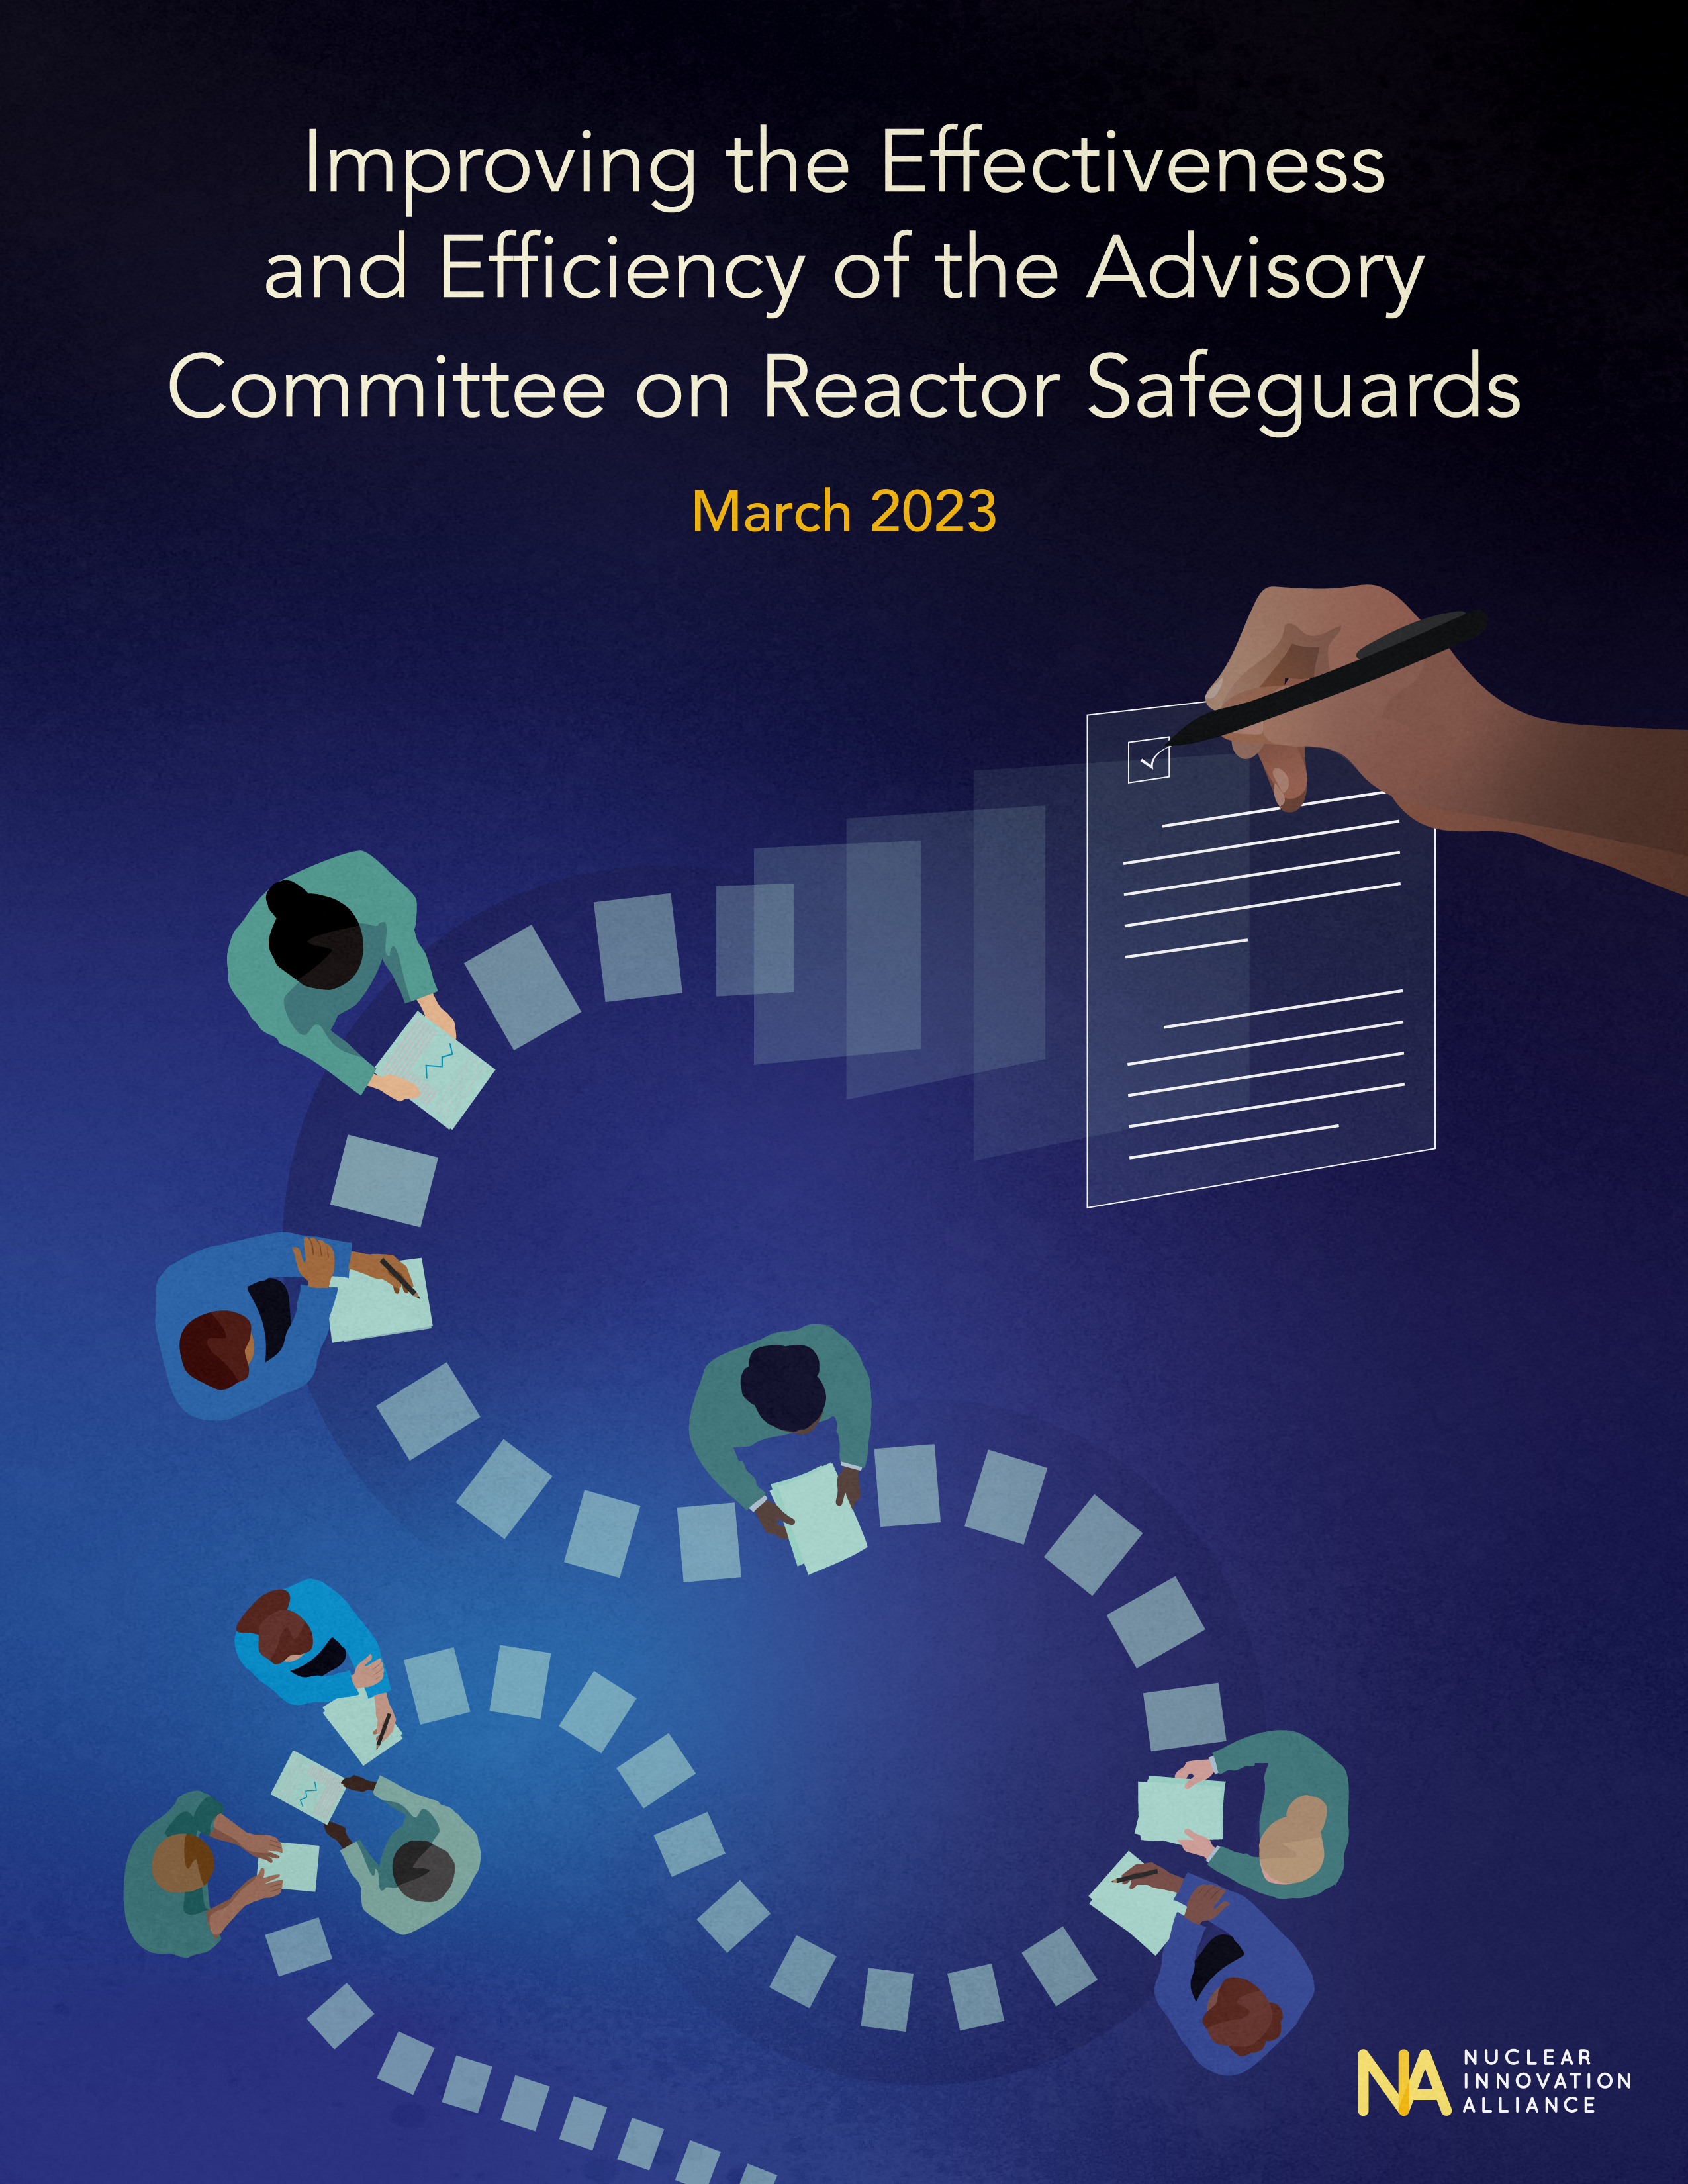 Improving the Effectiveness and Efficiency of the Advisory Committee on Reactor Safeguards